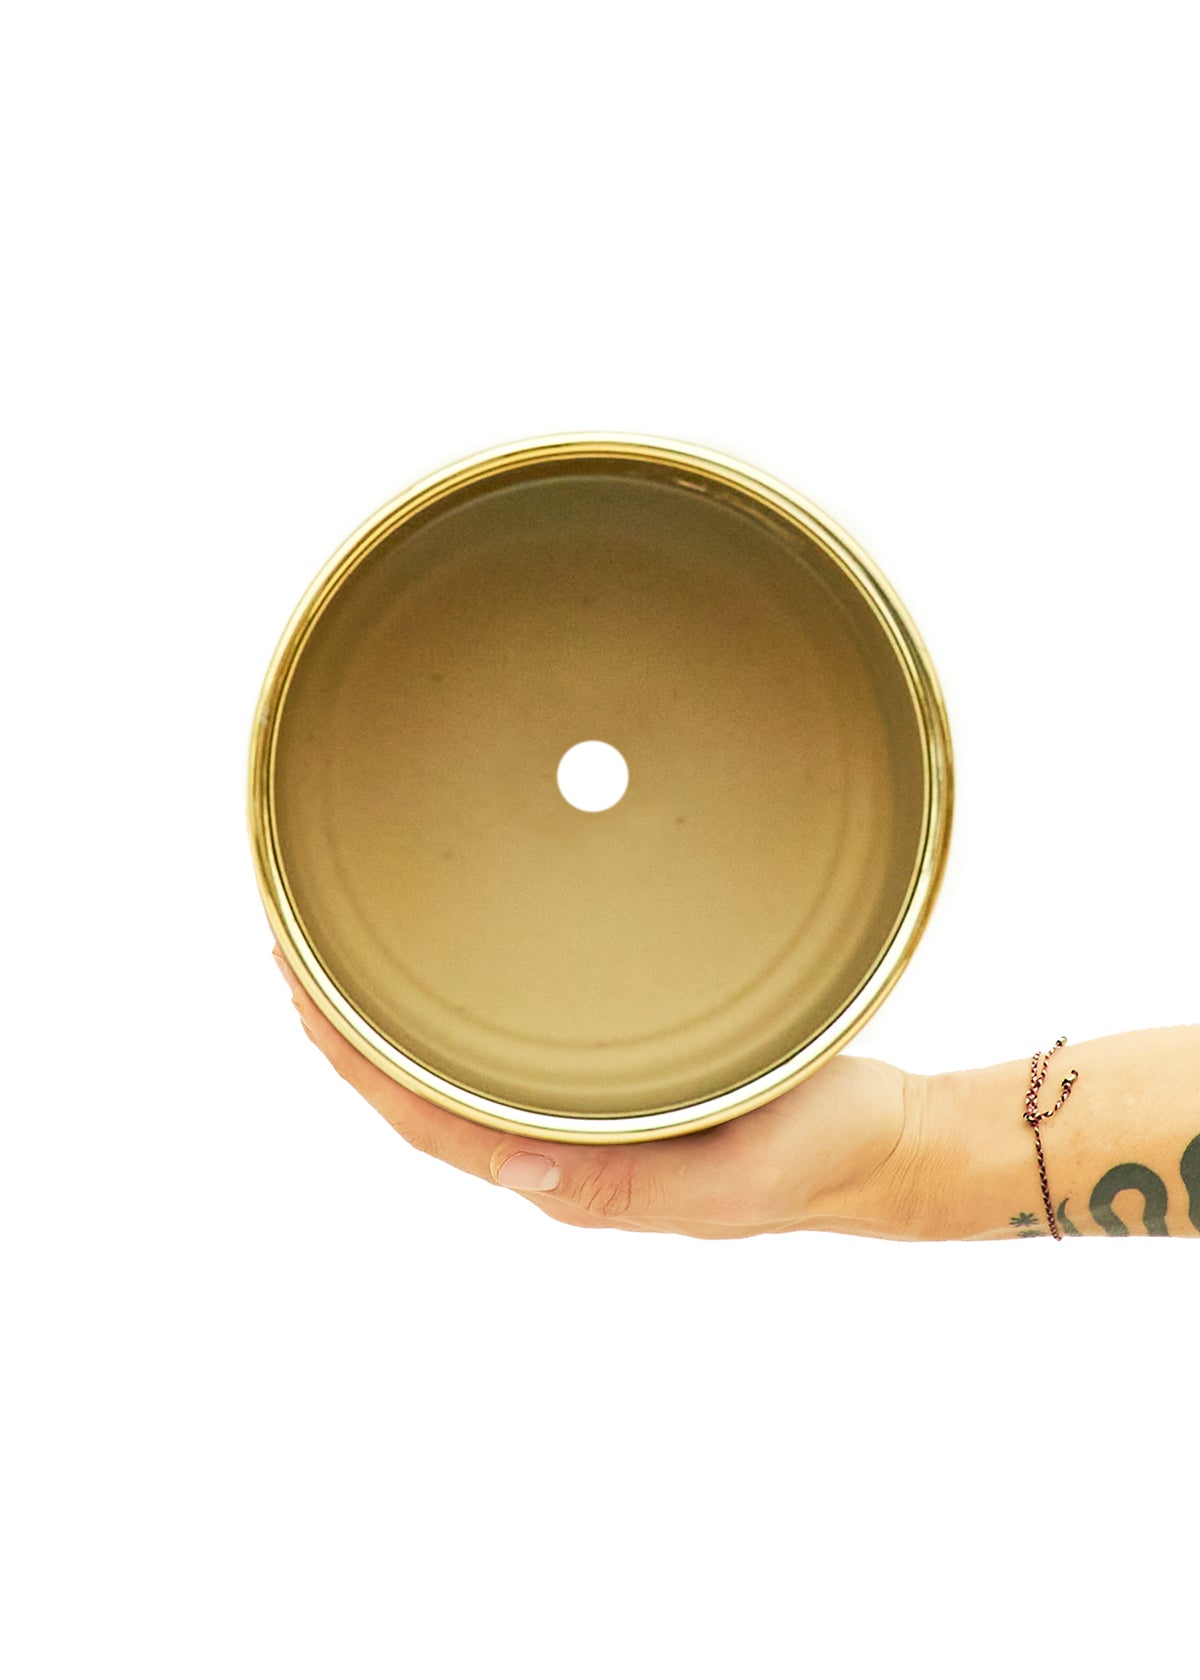 Shiny Gold Cylindrical Ceramic planter 5" wide with a white background with a hand holding it to view the top 